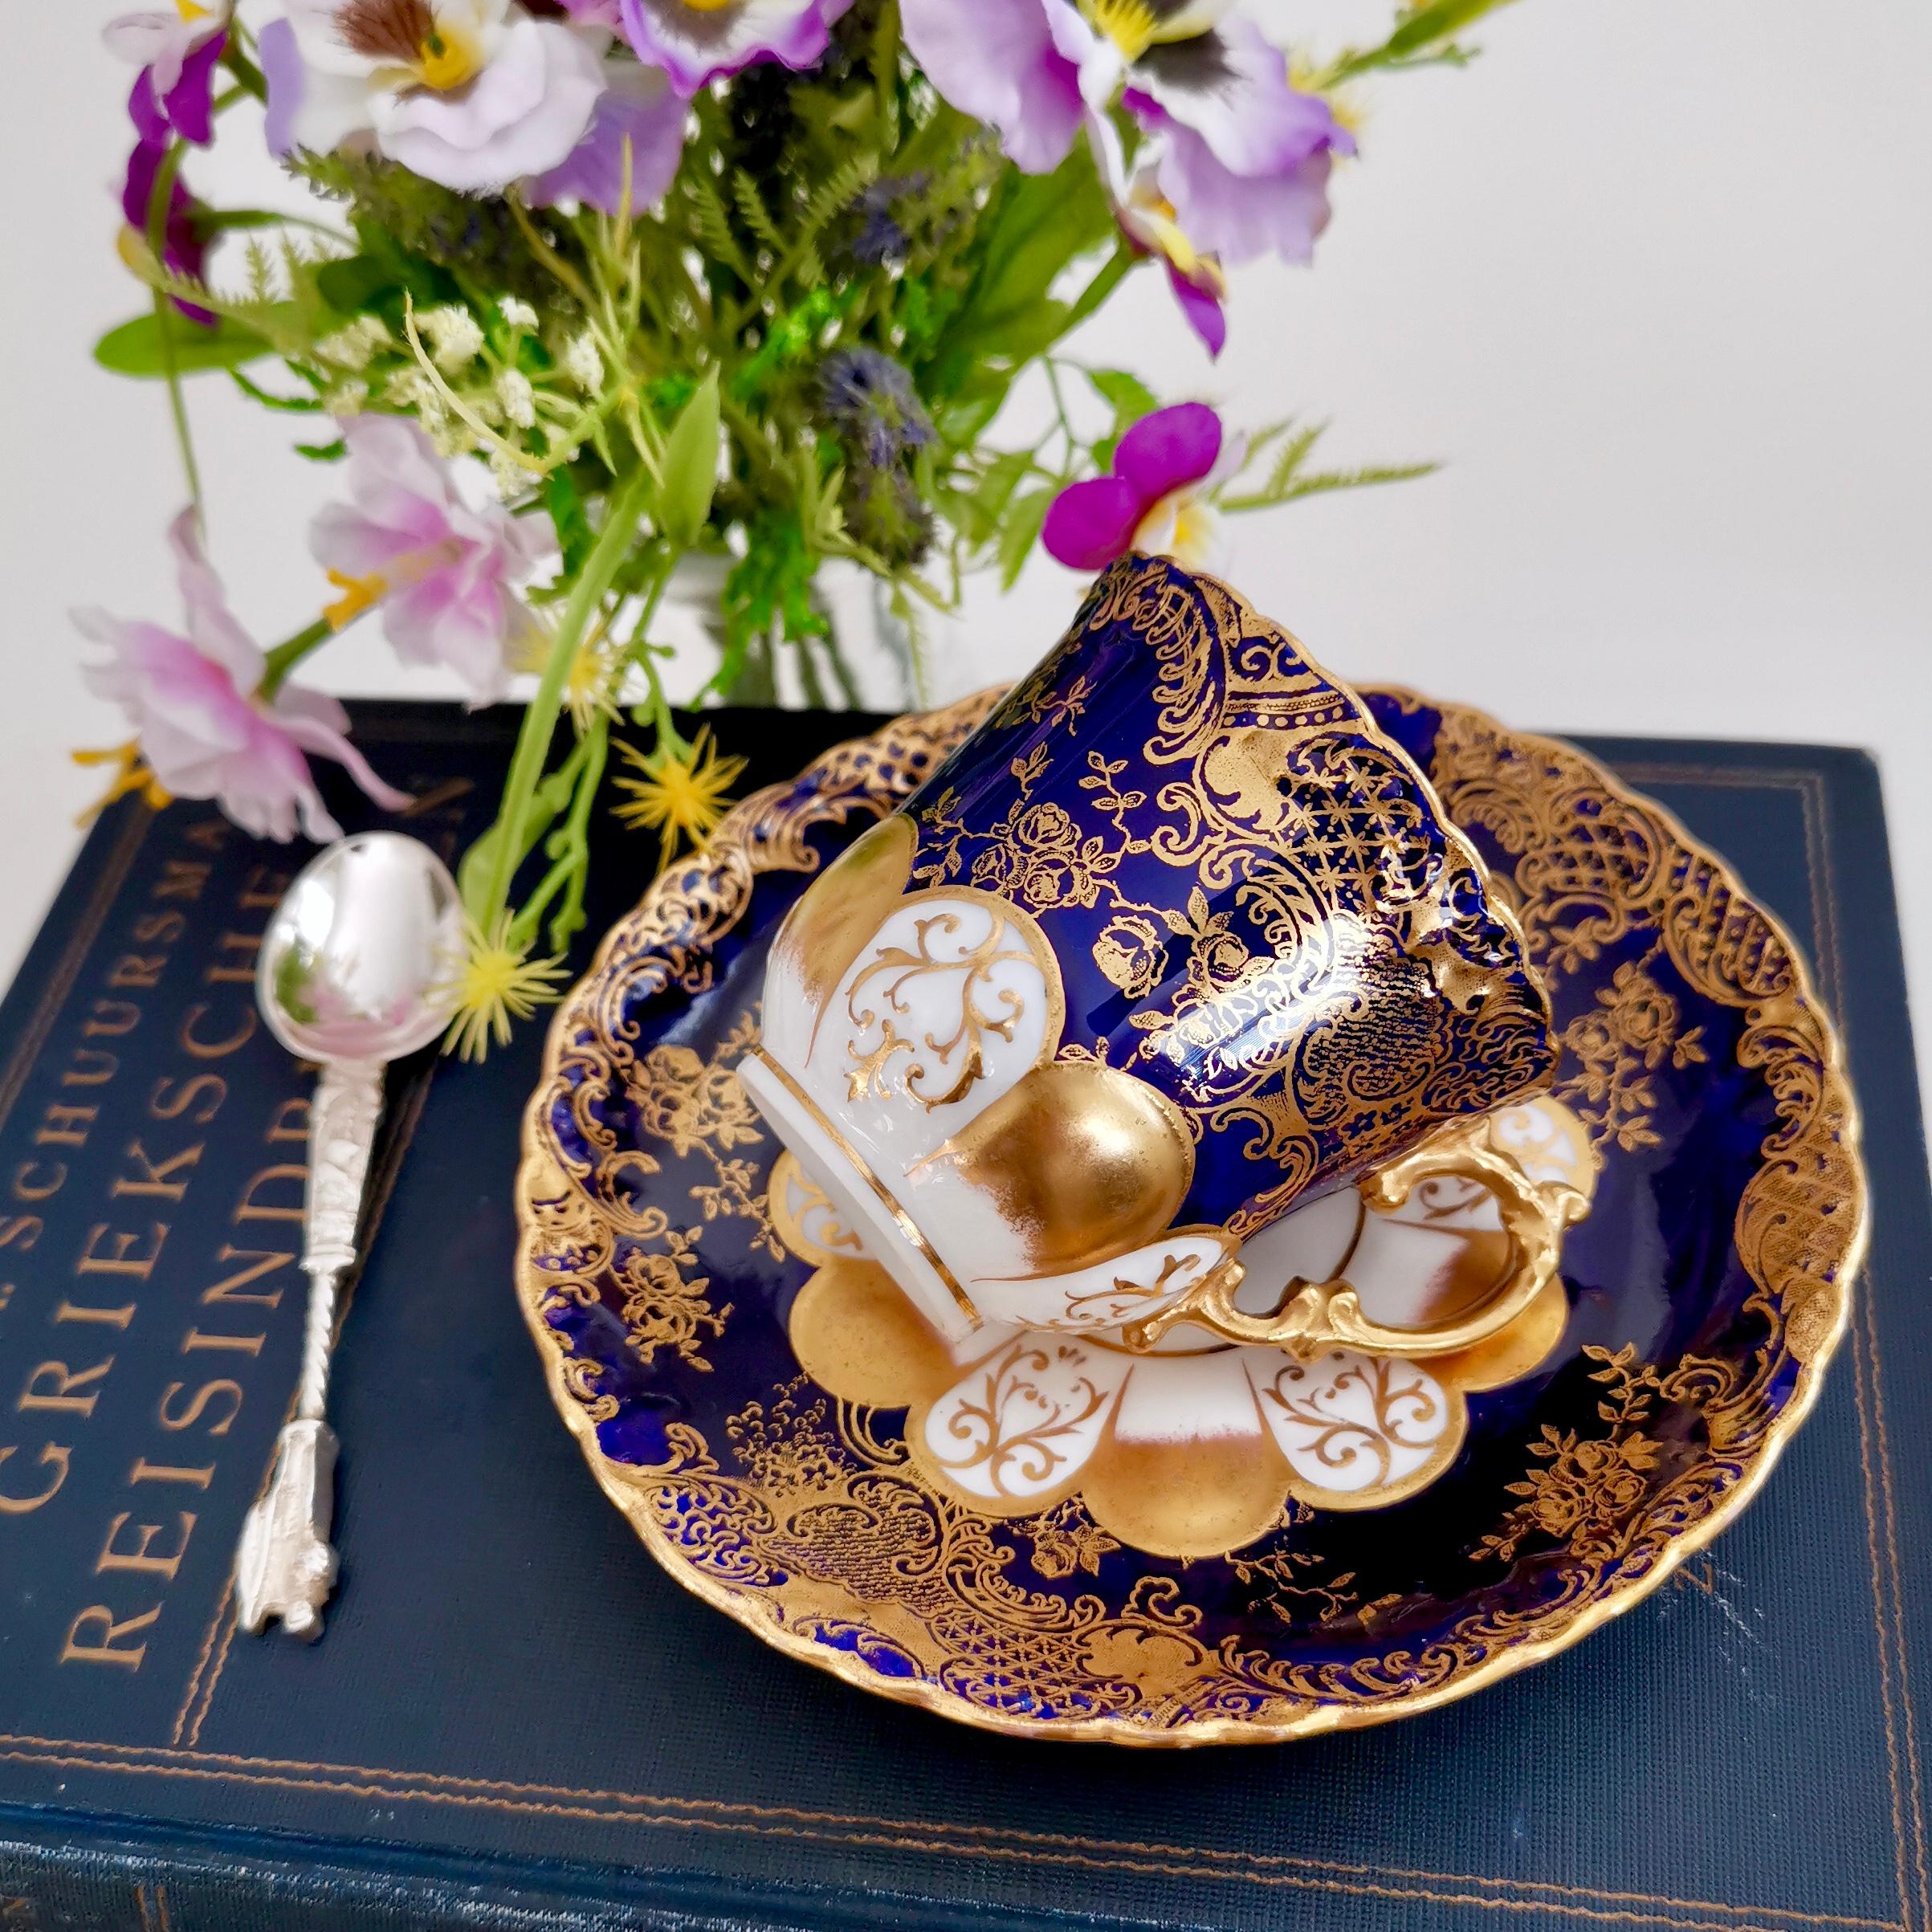 This is a wonderful Aynsley demitasse cup and saucer made between 1891 and 1912. The set is decorated in cobalt blue and gilt.

This little cup would make a perfect Valentine's Day gift!

Aynsley was one of the older potteries in Staffordshire,